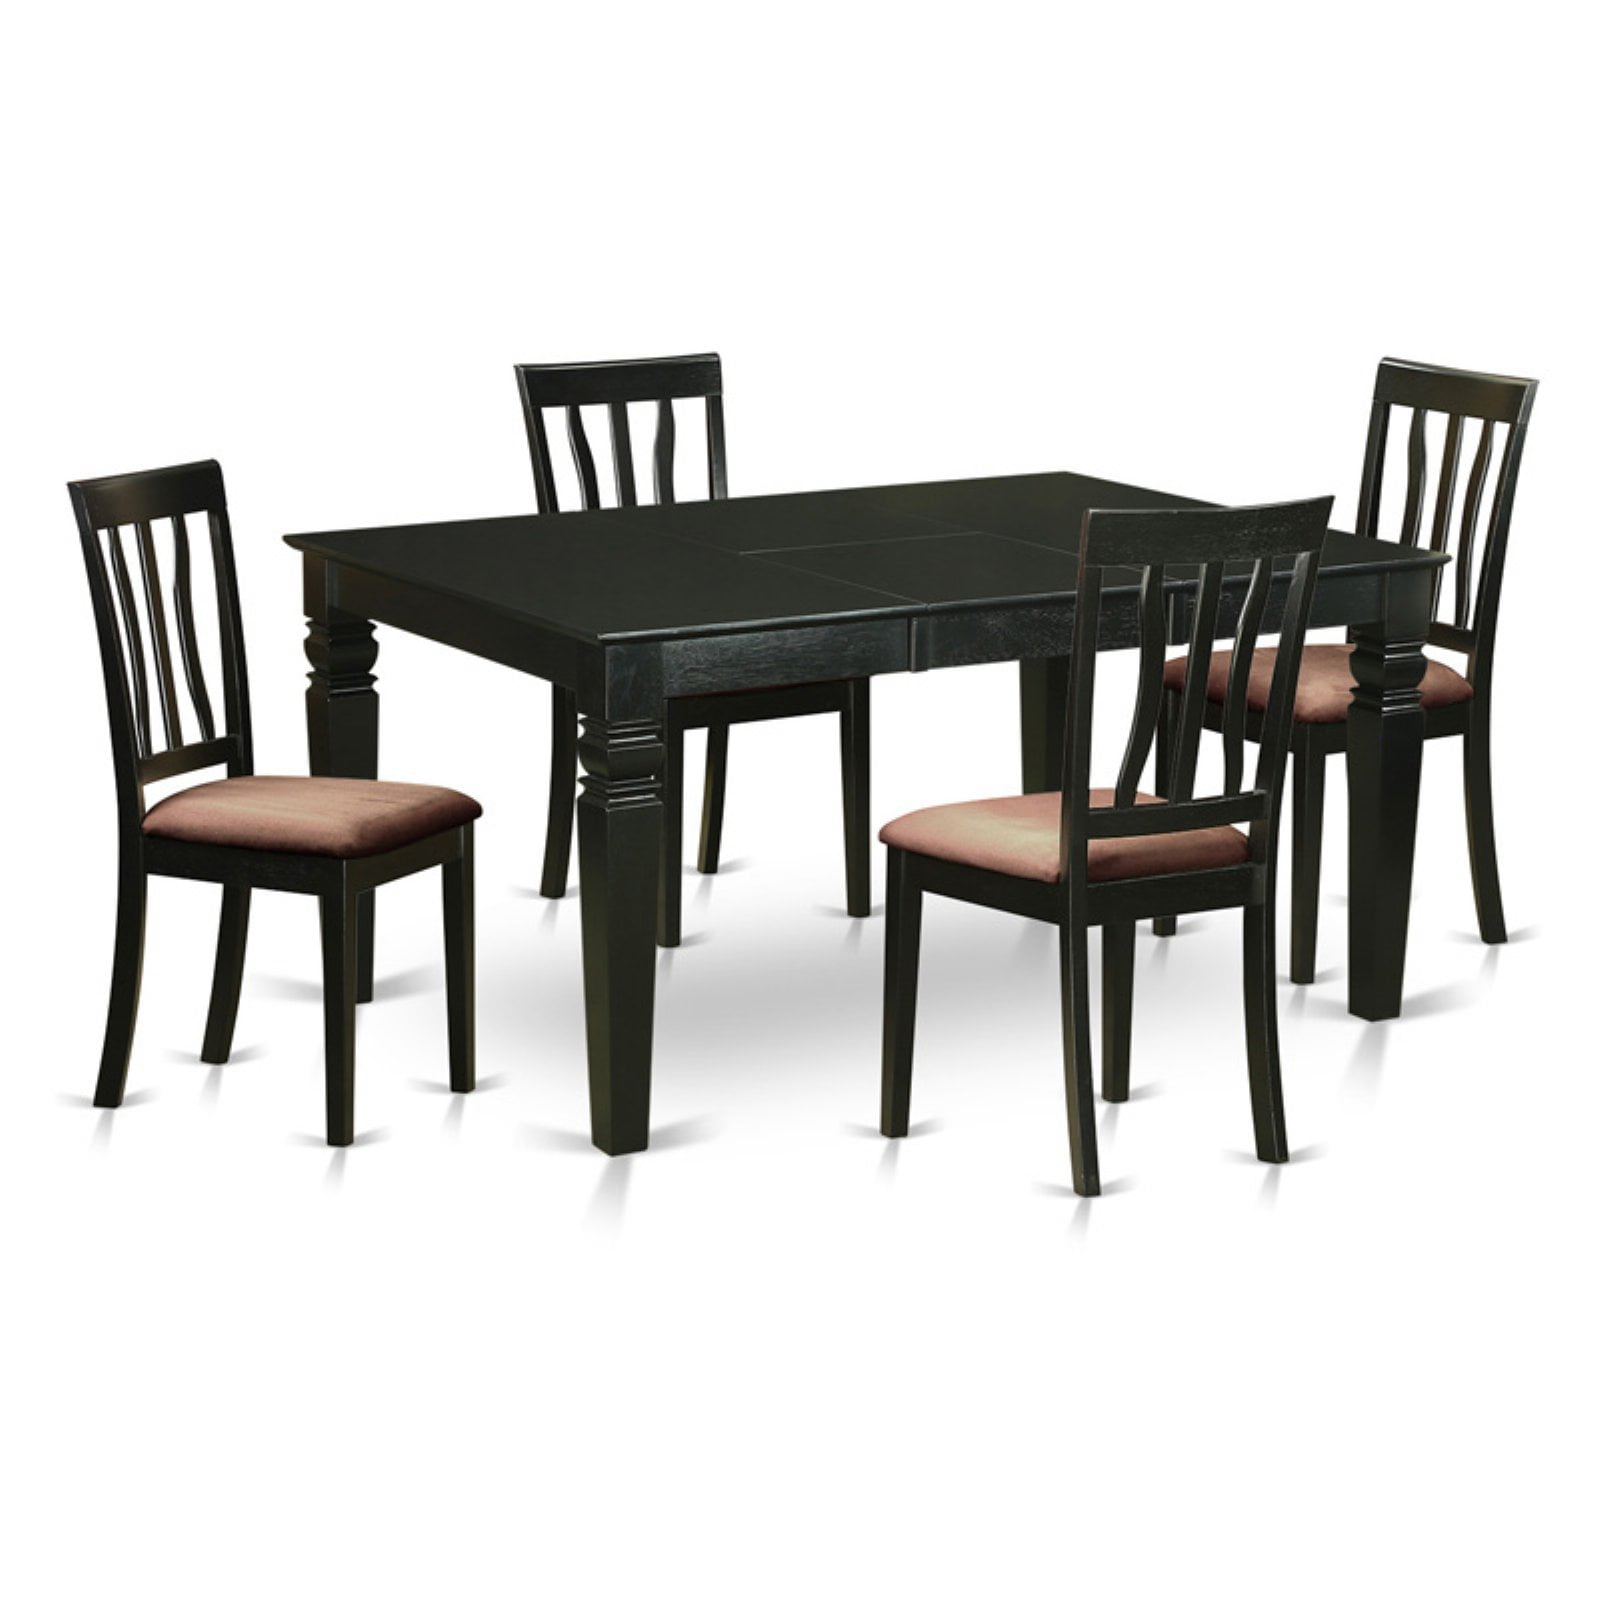 East West Furniture Weston 5 Piece Splat Back Dining Table ...